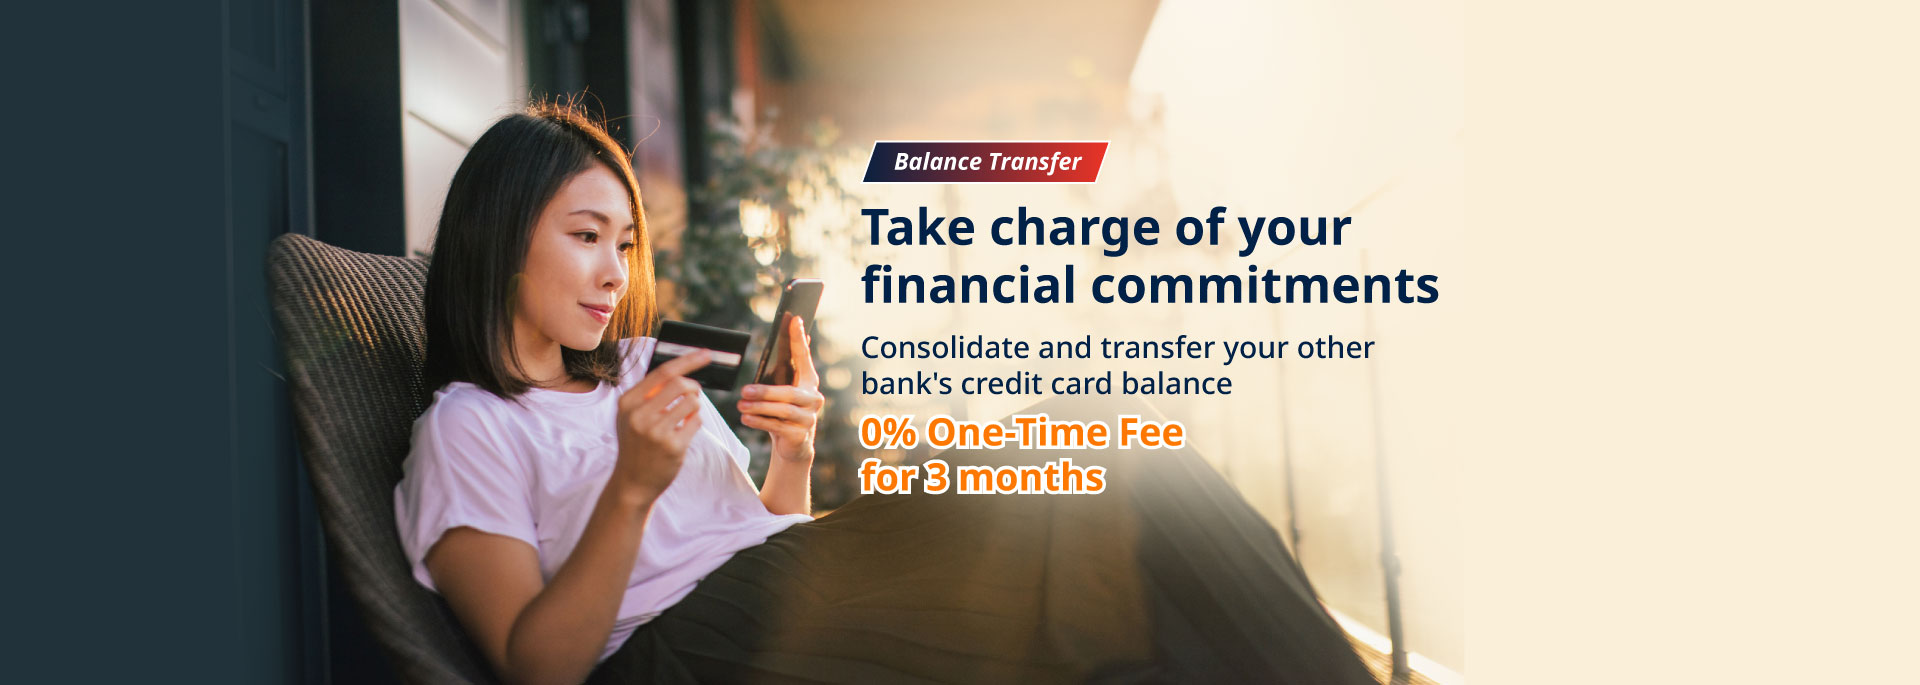 By Invitation Only: Exclusive 0% Interest Balance Transfer For You